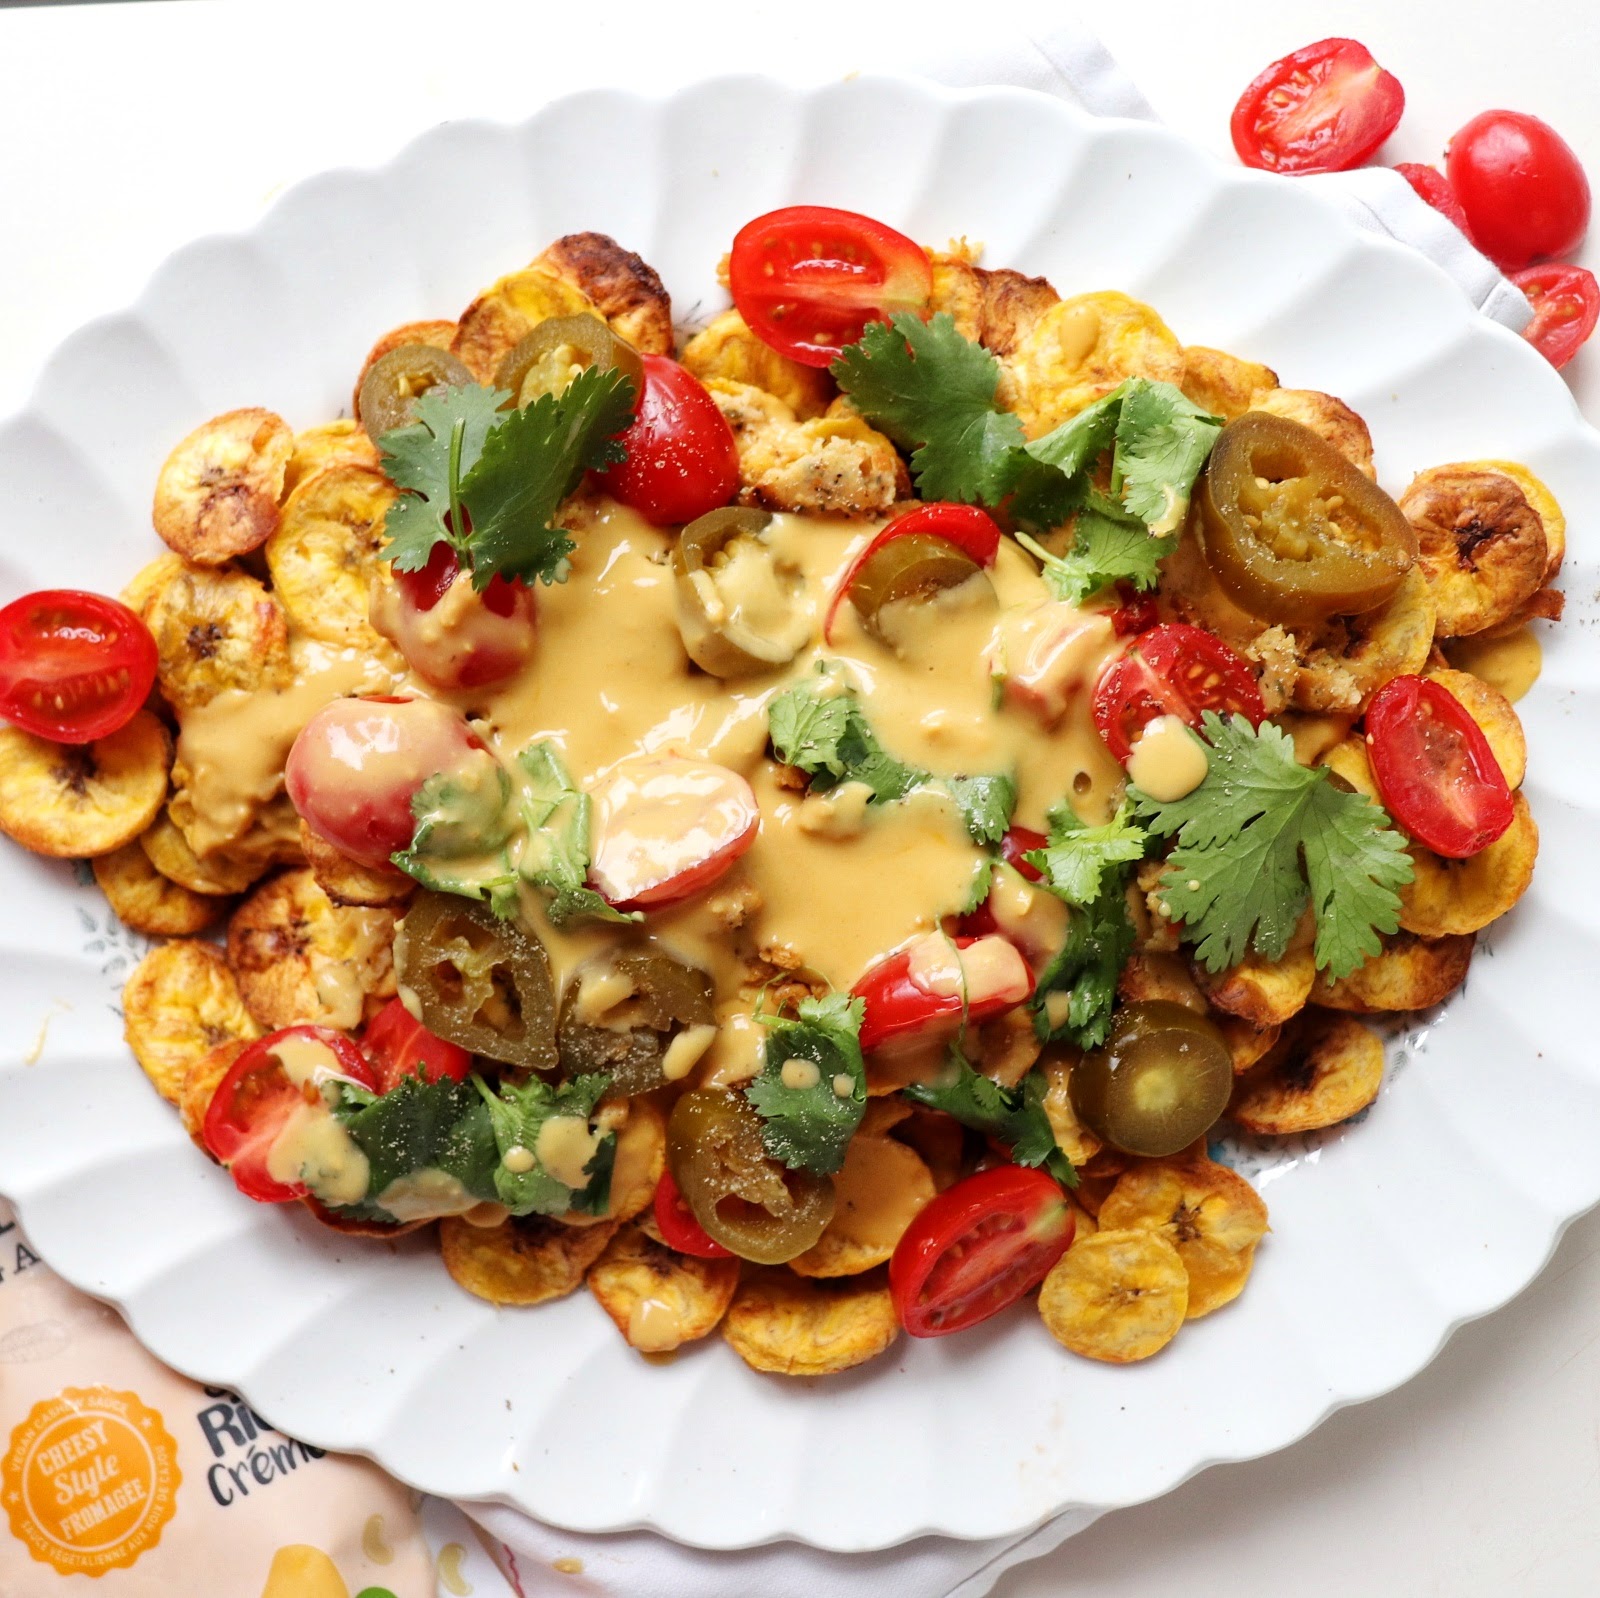 A plate of nachos loaded with cheesy sauce and healthy toppings, garnished with cilantro.